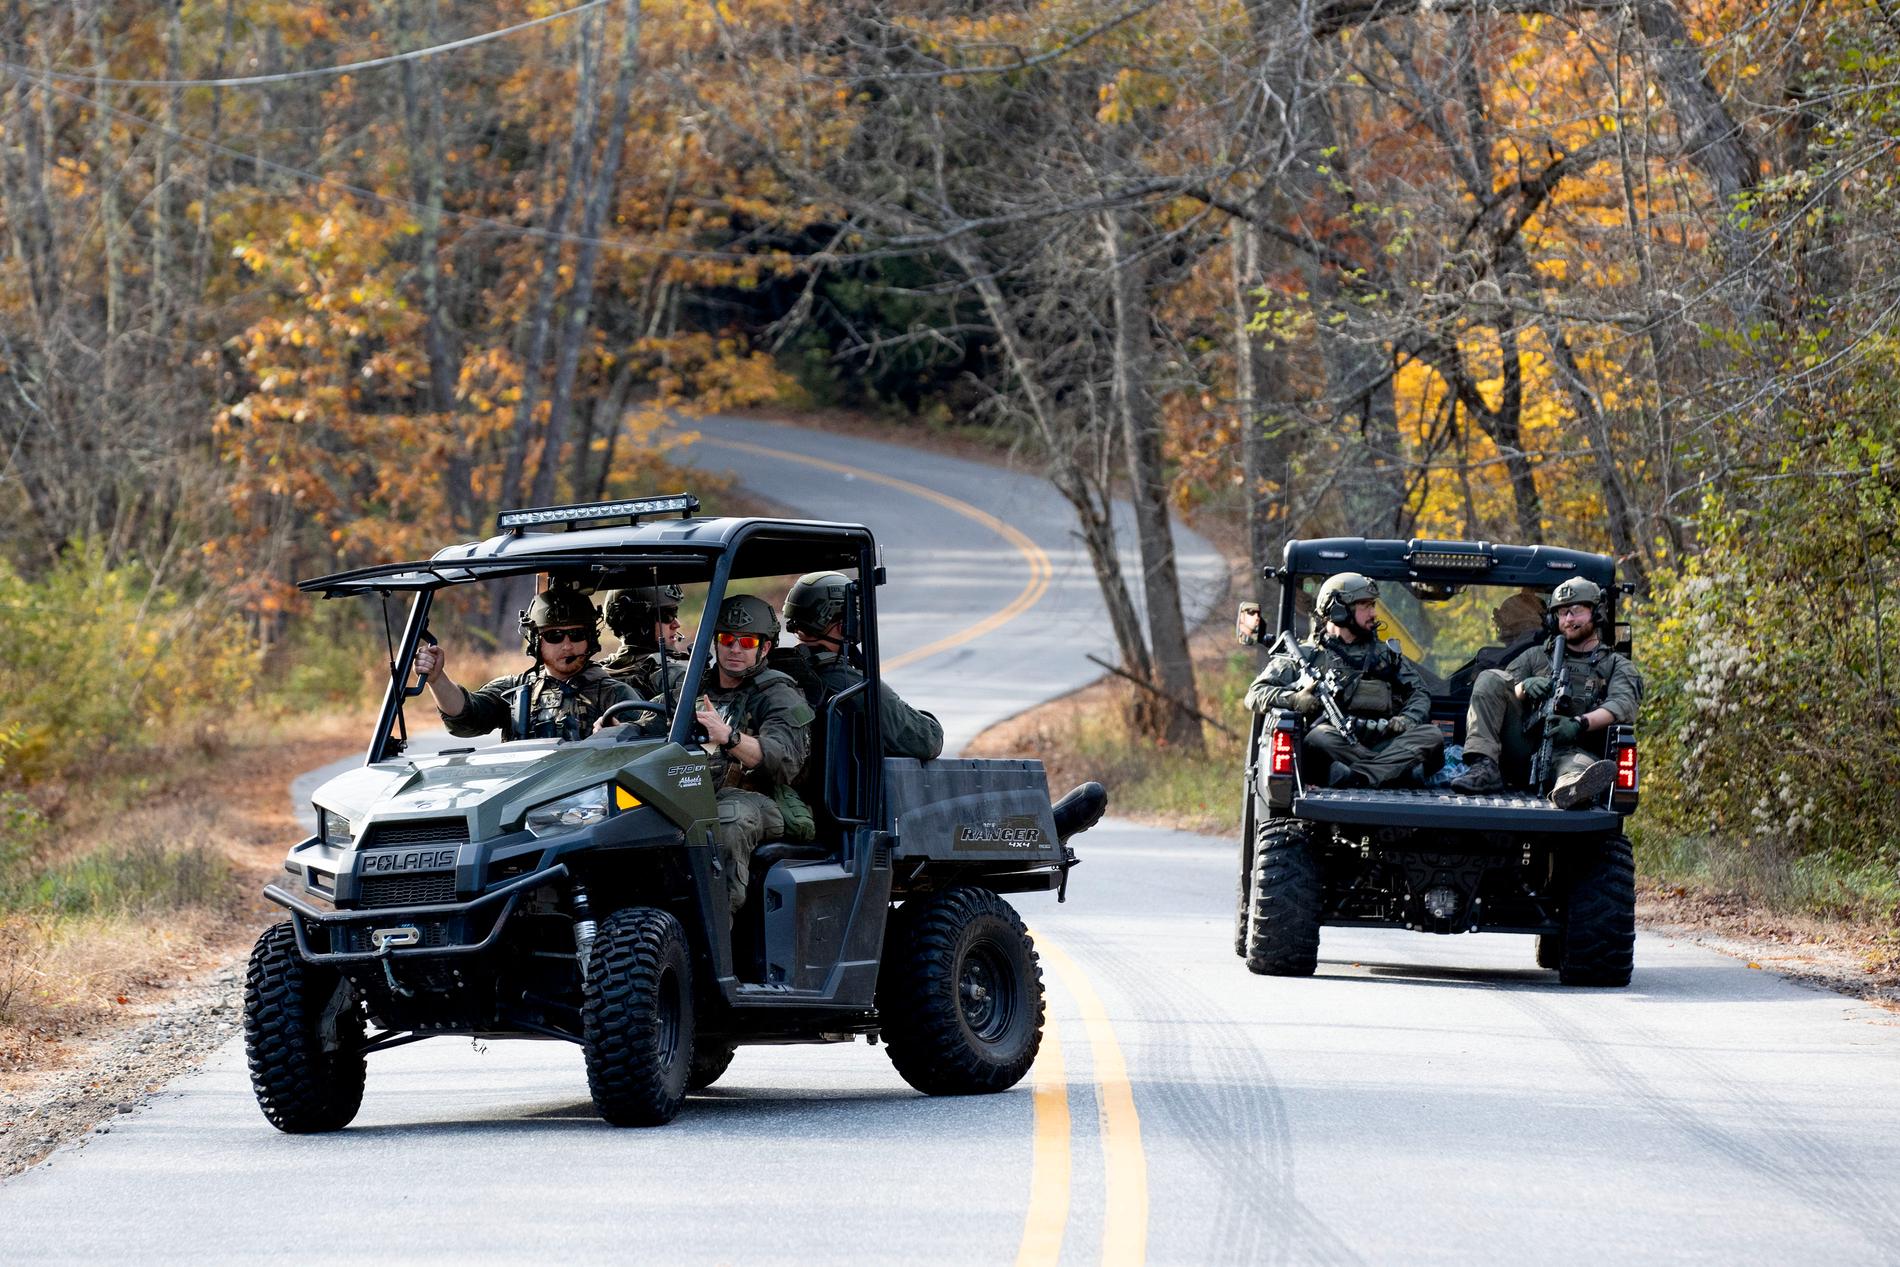 Intense Manhunt for Suspected Perpetrator in Maine: Latest Updates on Lewiston Mass Shooting